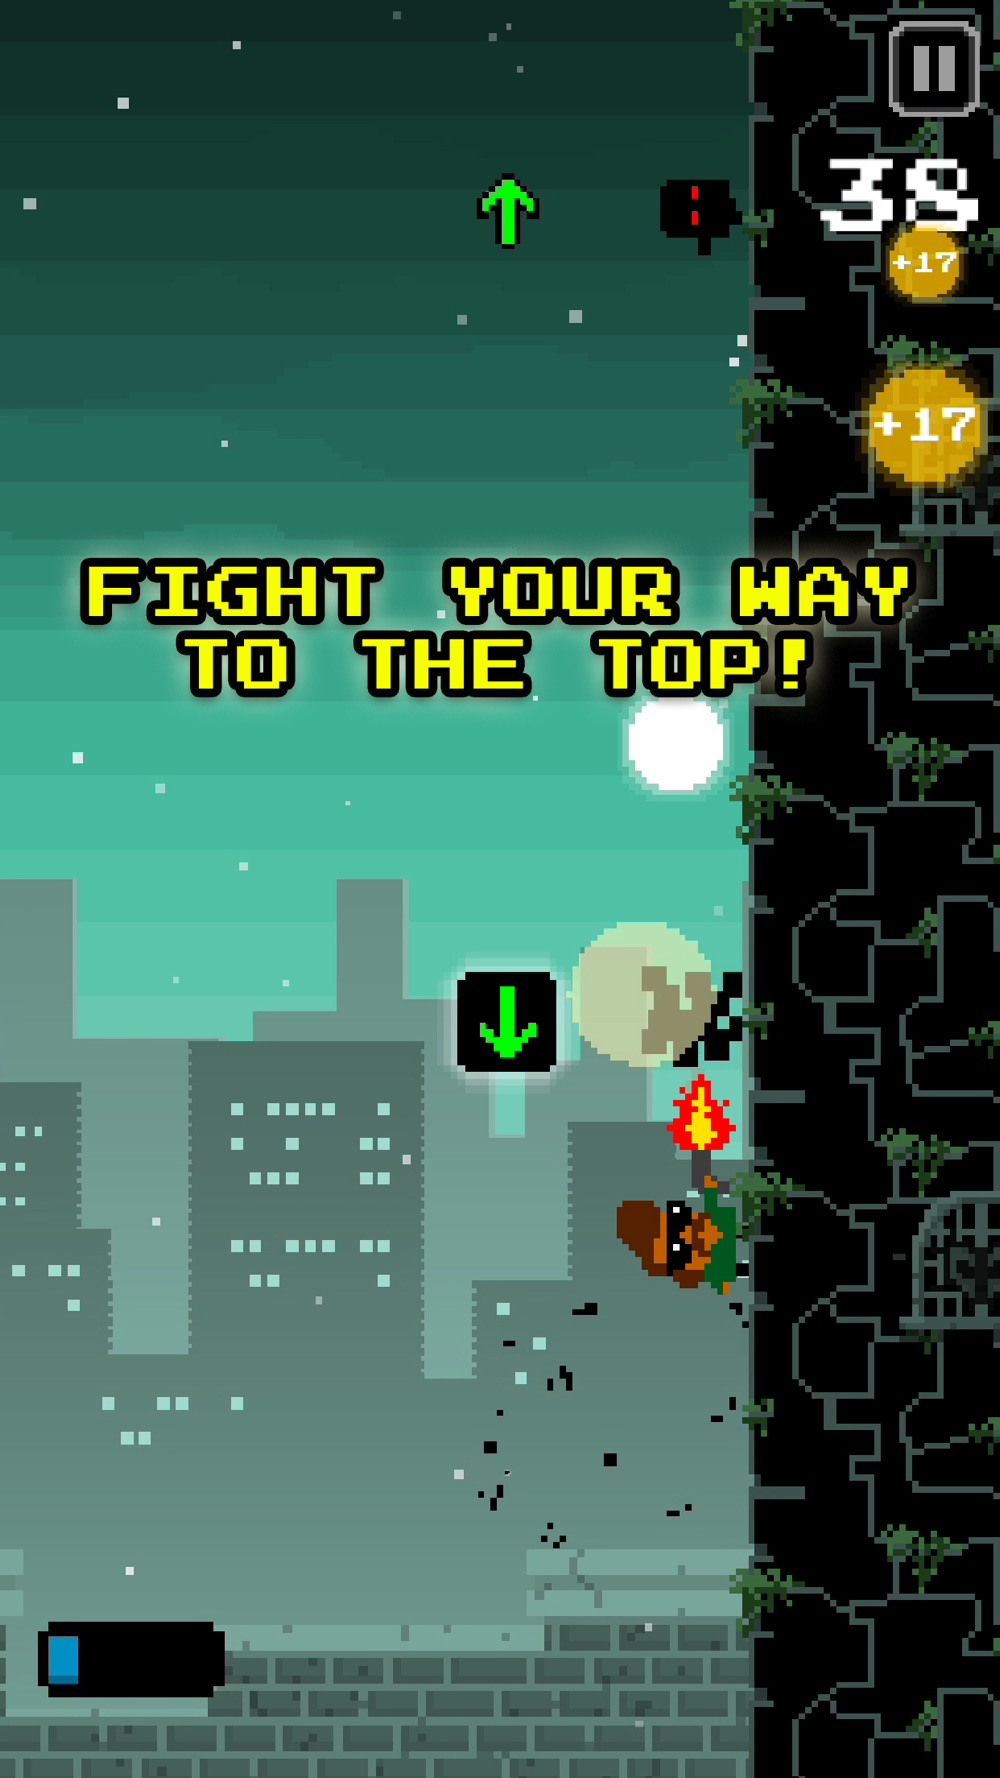 Tower Slash – Only the fastest finger will survive